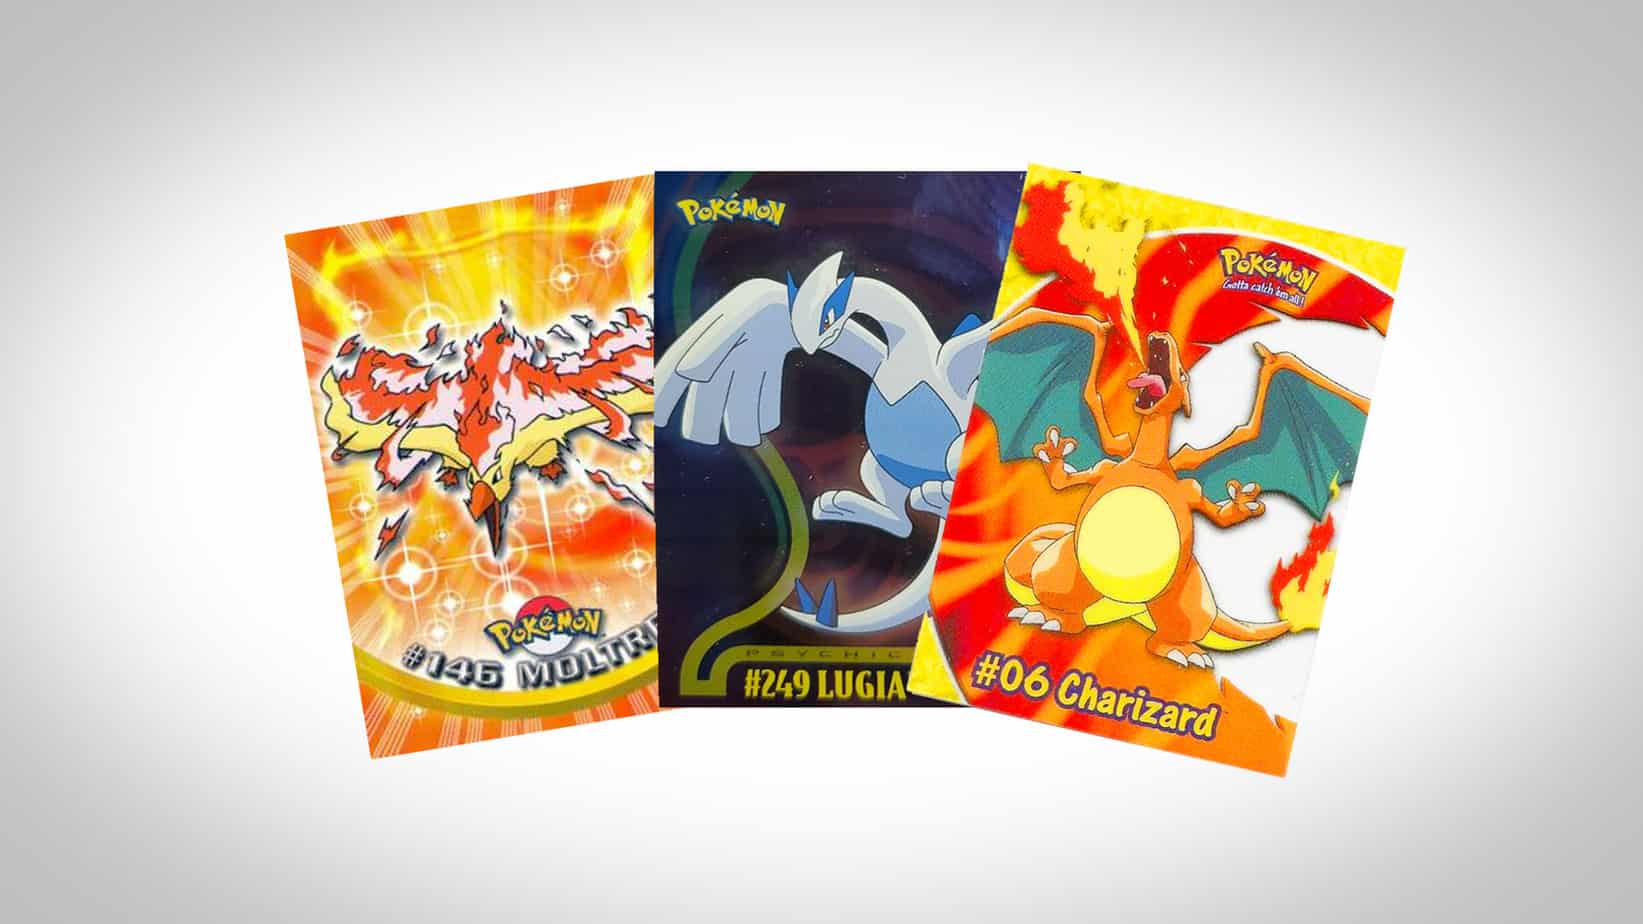 Details about   MULTI LIST SELECTION OF POKEMON Topps 1999 Trading Cards Series 2 